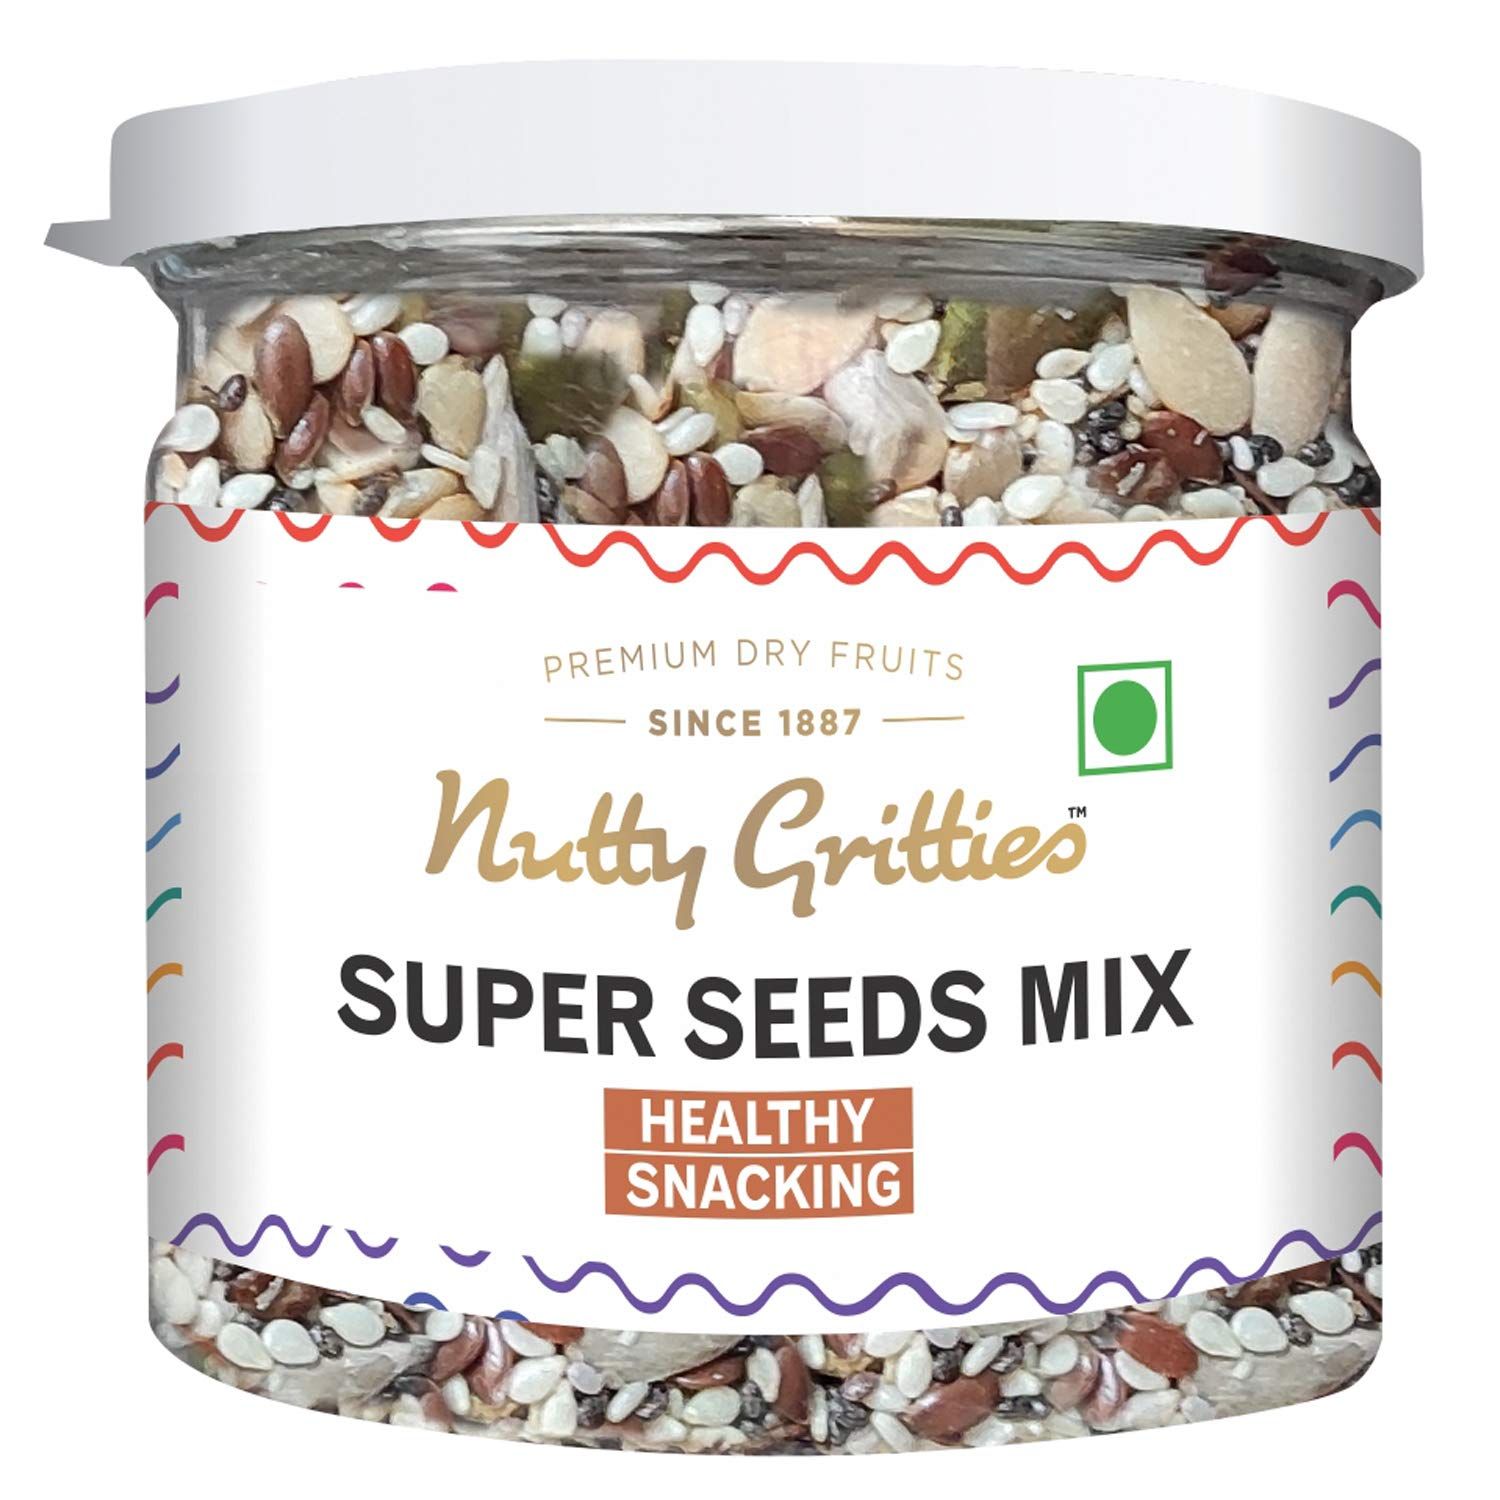 Nutty Gritties Super Seeds Mix Image